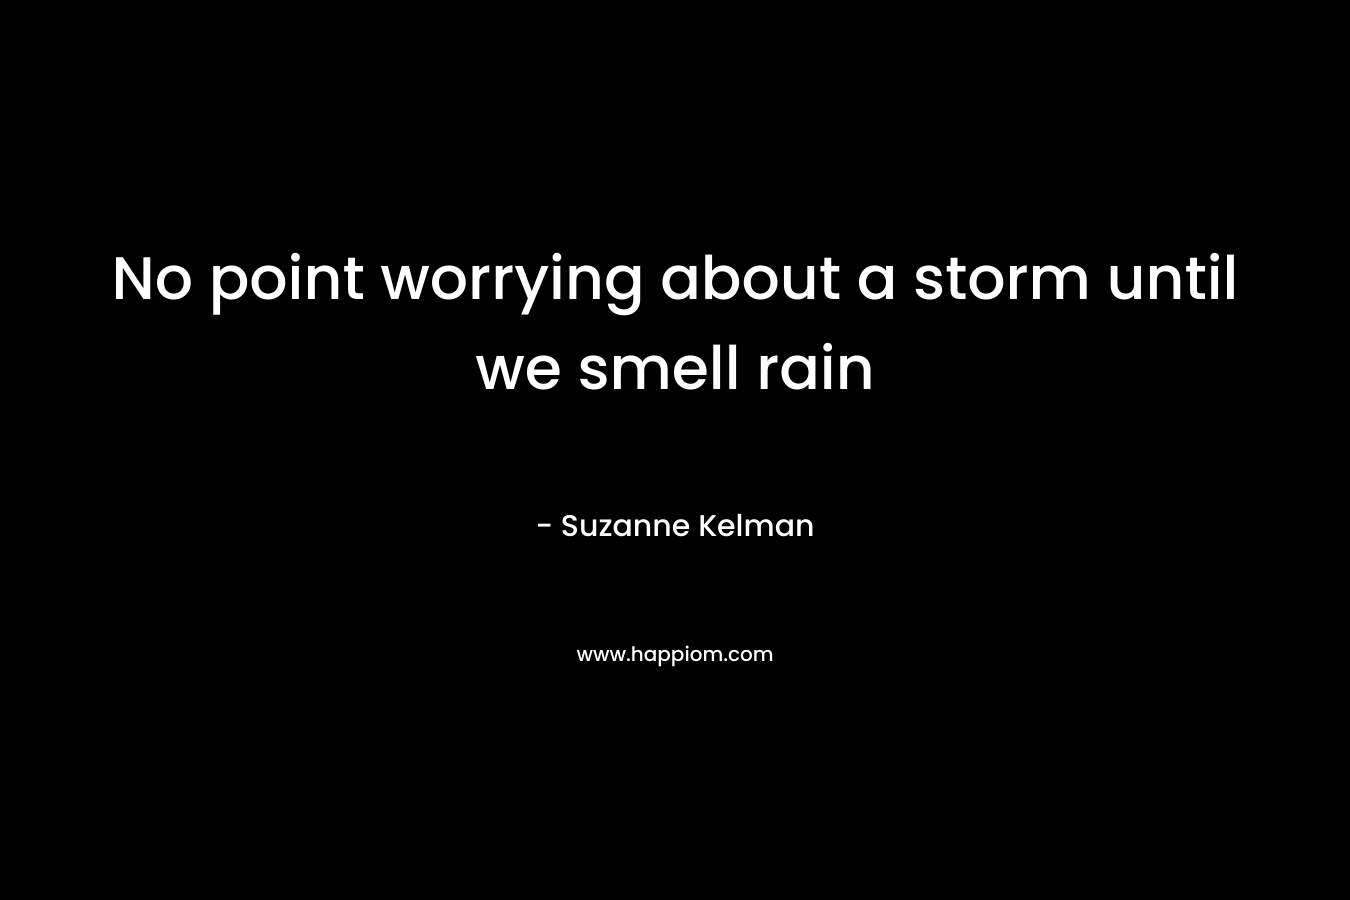 No point worrying about a storm until we smell rain